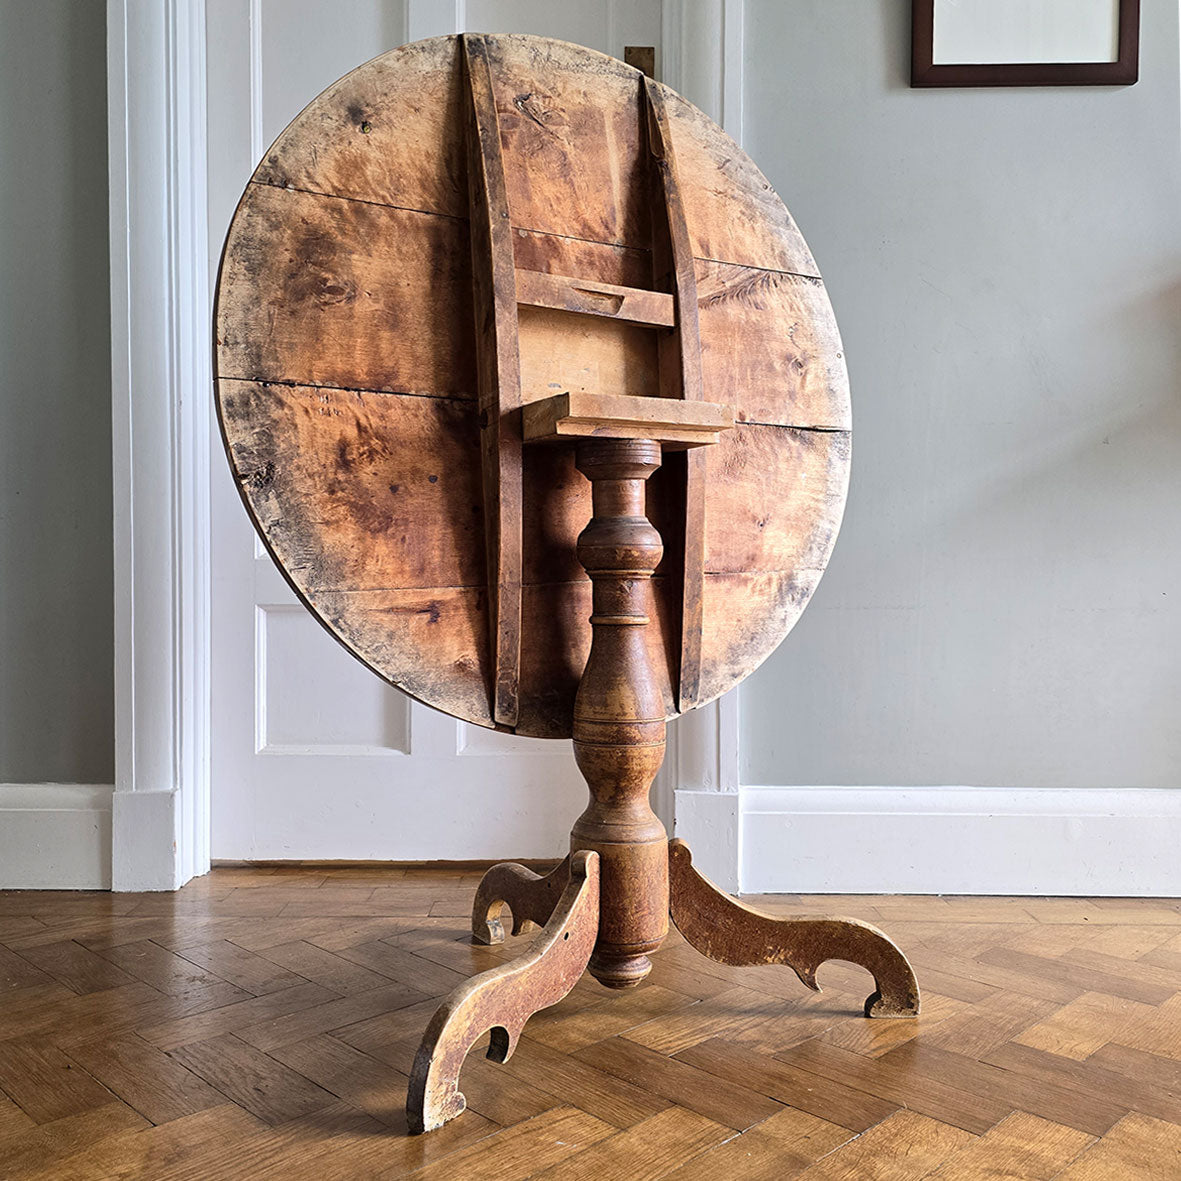 A lovely coloured Rustic French Tilt Top Table. It has a round top raised on three nicely profiled legs and central turned boss. The base still retains its original scumble painted finish. - SHOP NOW - www.intovintage.co.uk